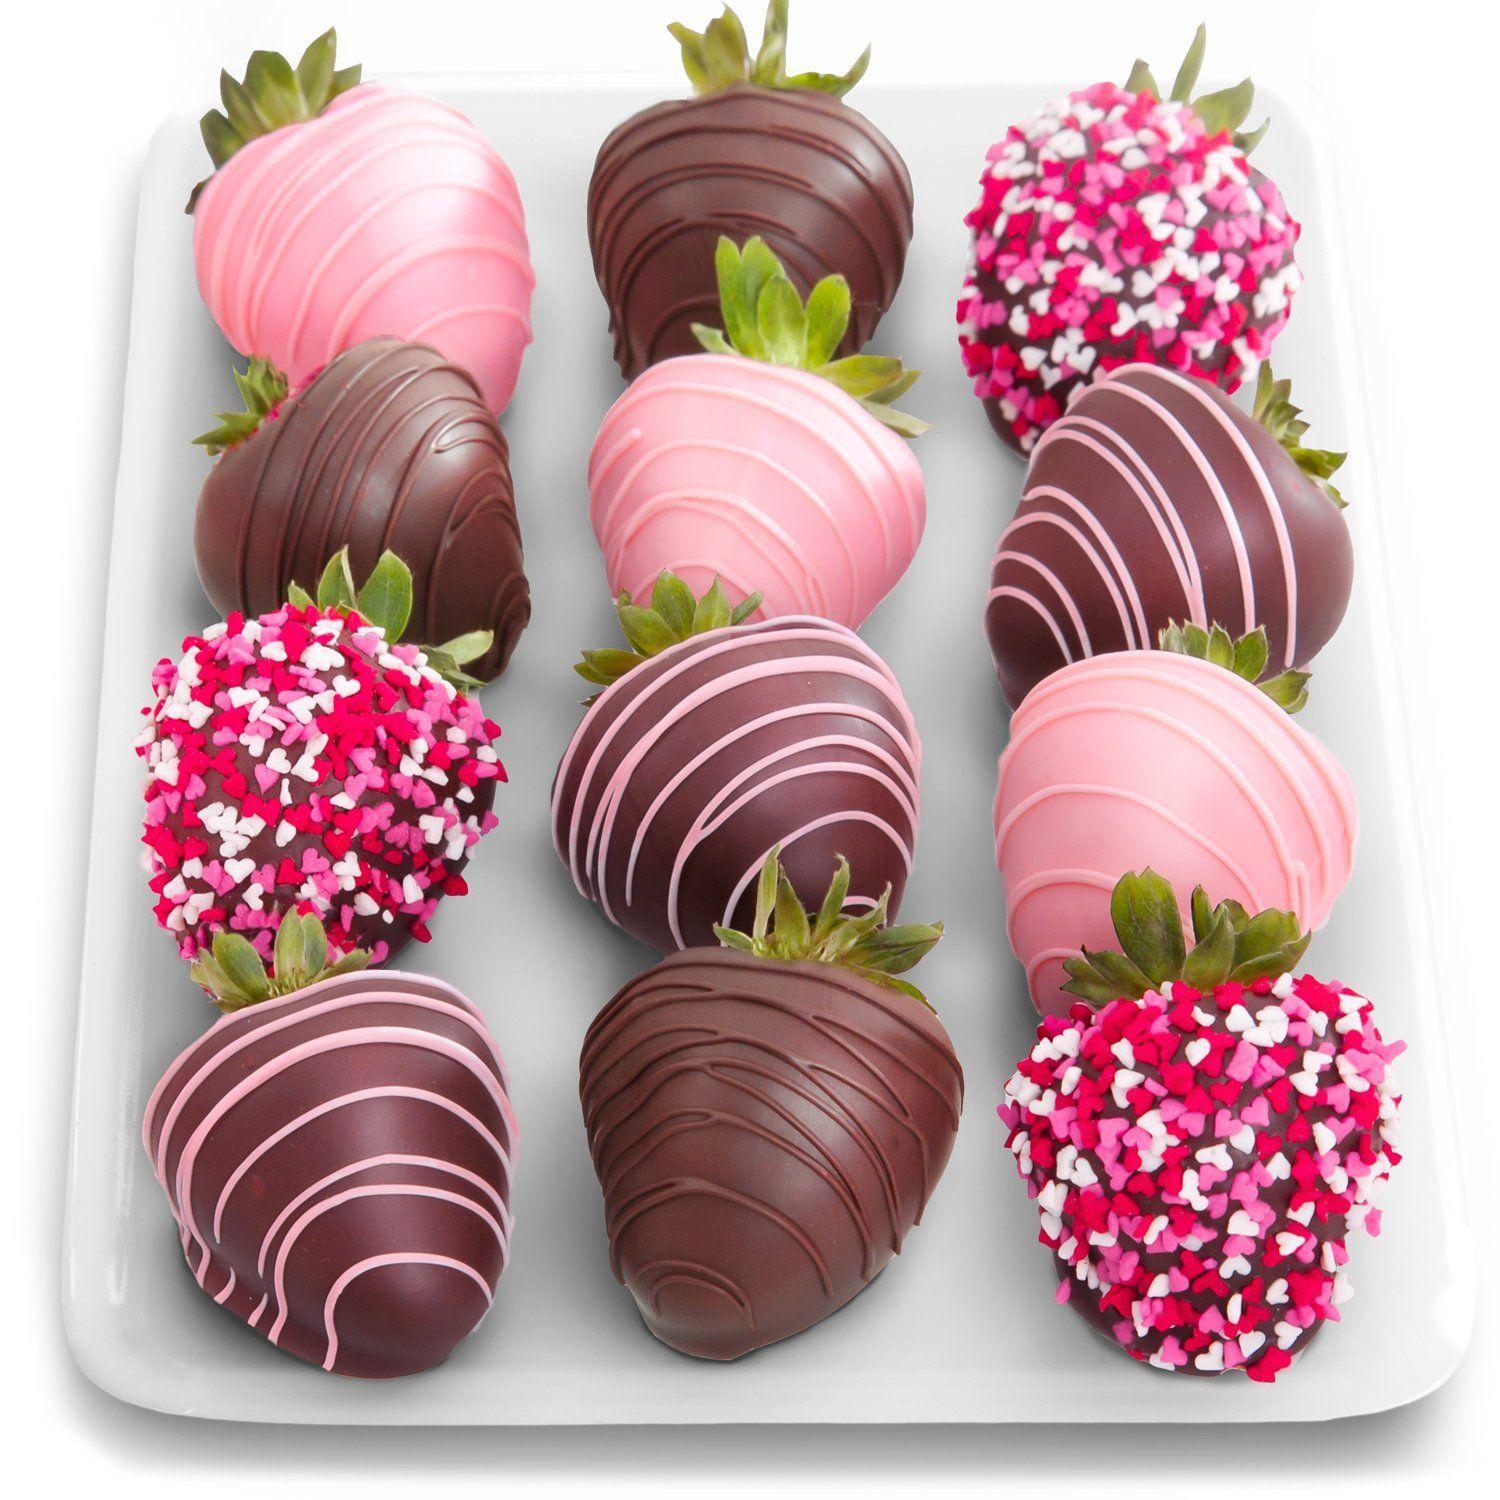 Amazon : Golden State Fruit 12 Love Berries Chocolate Covered